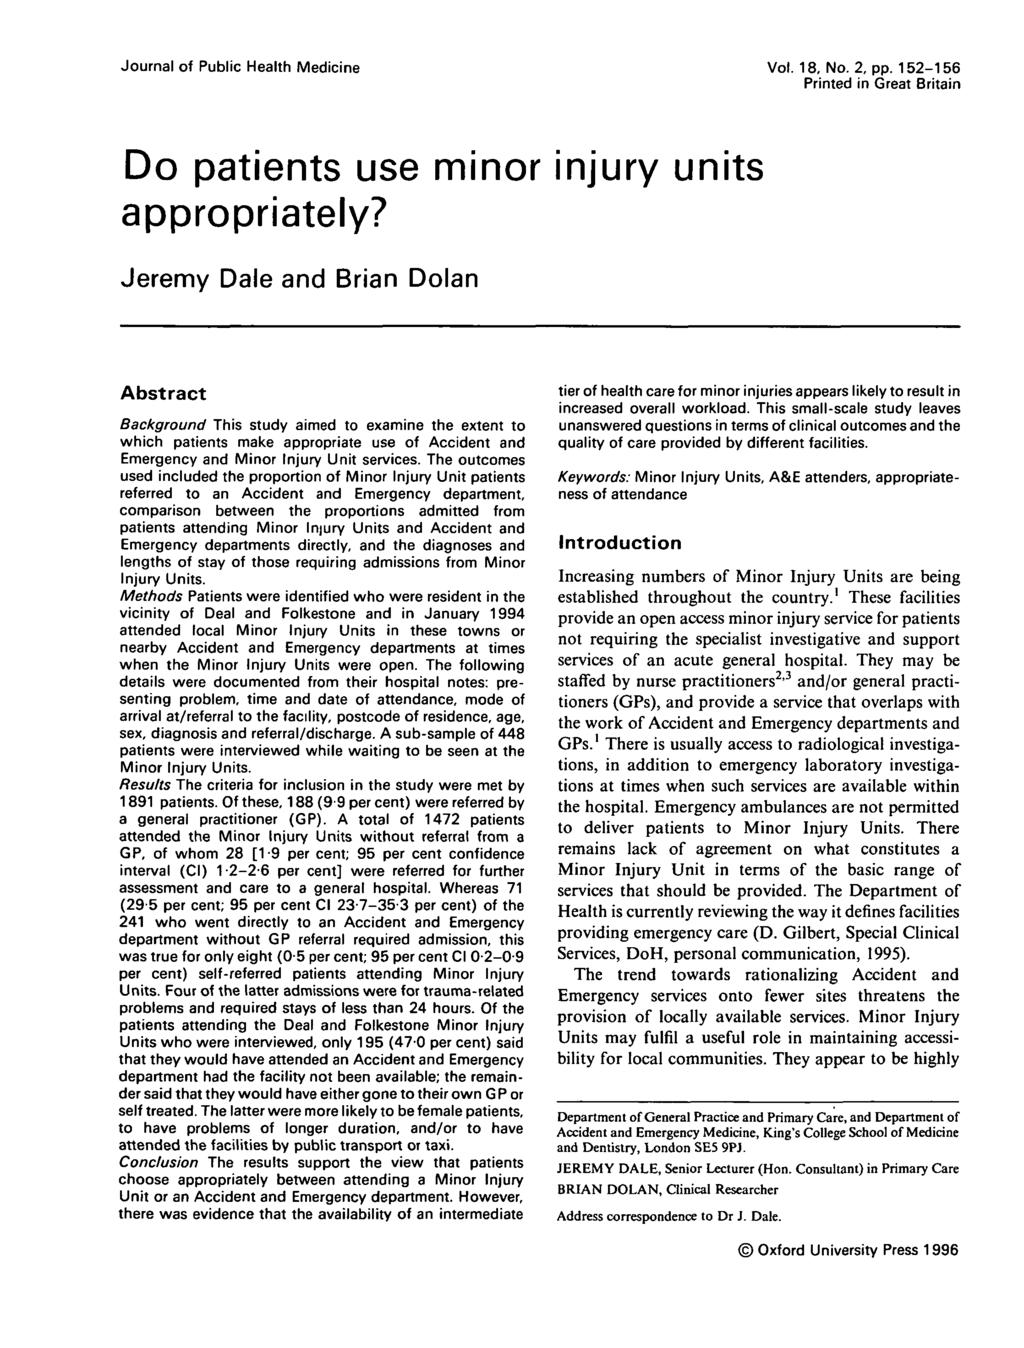 Journal of Public Health Medicine Vol. 18, No. 2, pp. 152-156 Printed in Great Britain Do patients use minor injury units appropriately?